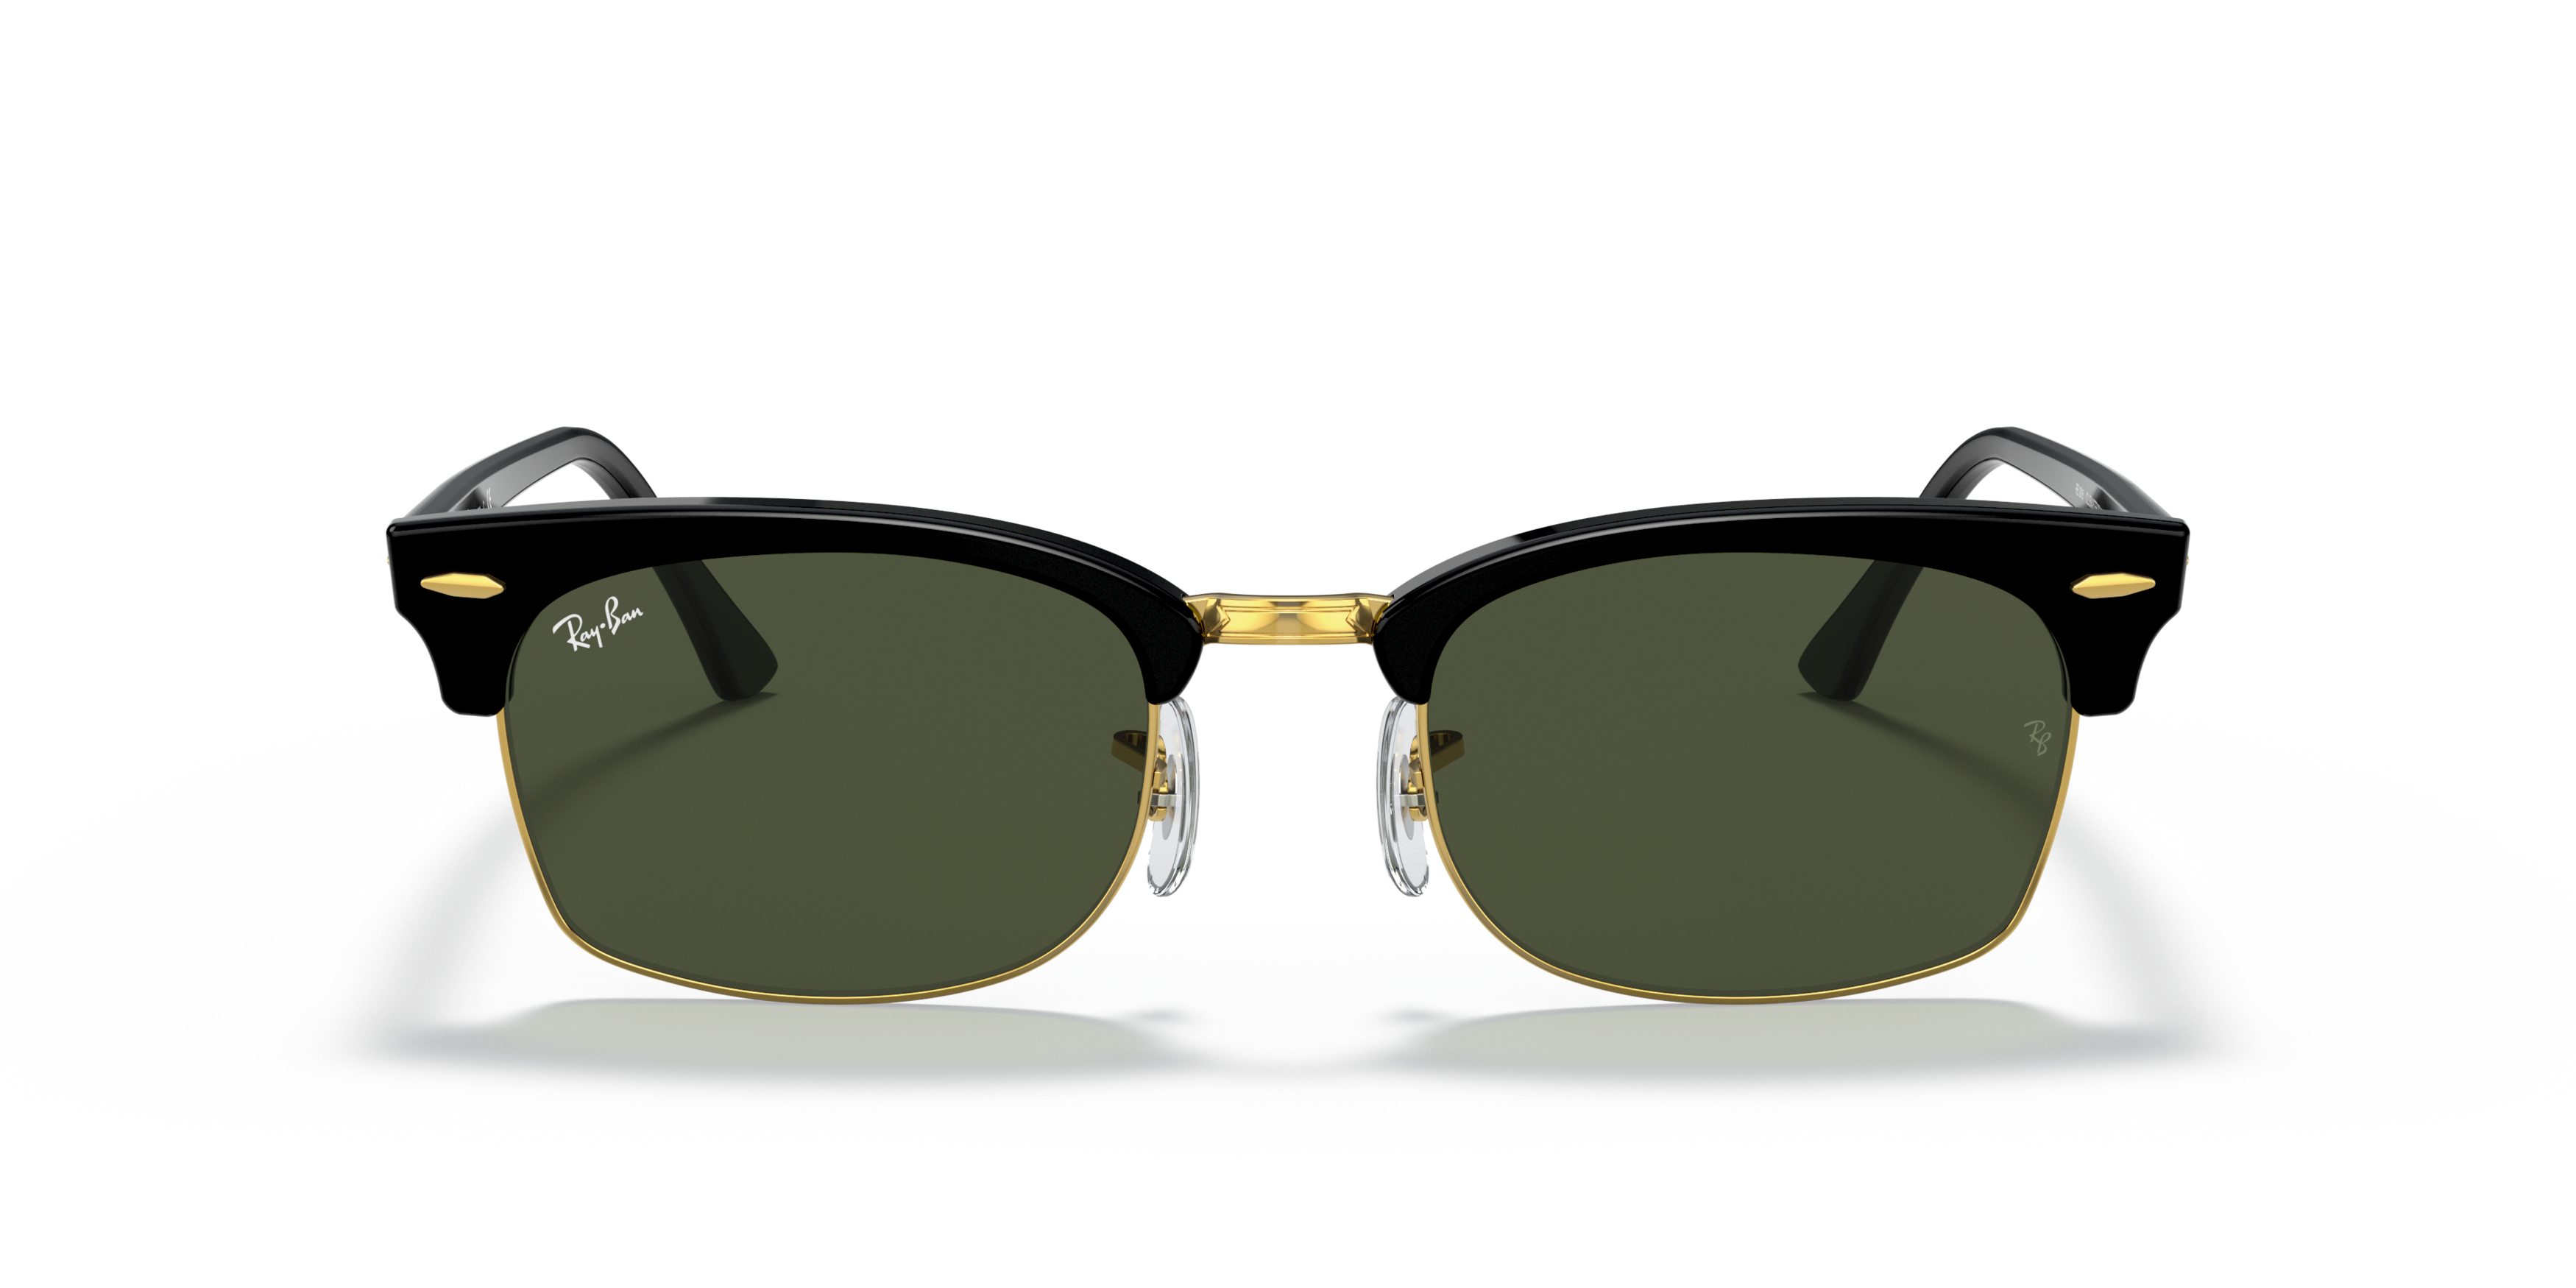 [products.image.front] RAY-BAN RB3916 130331